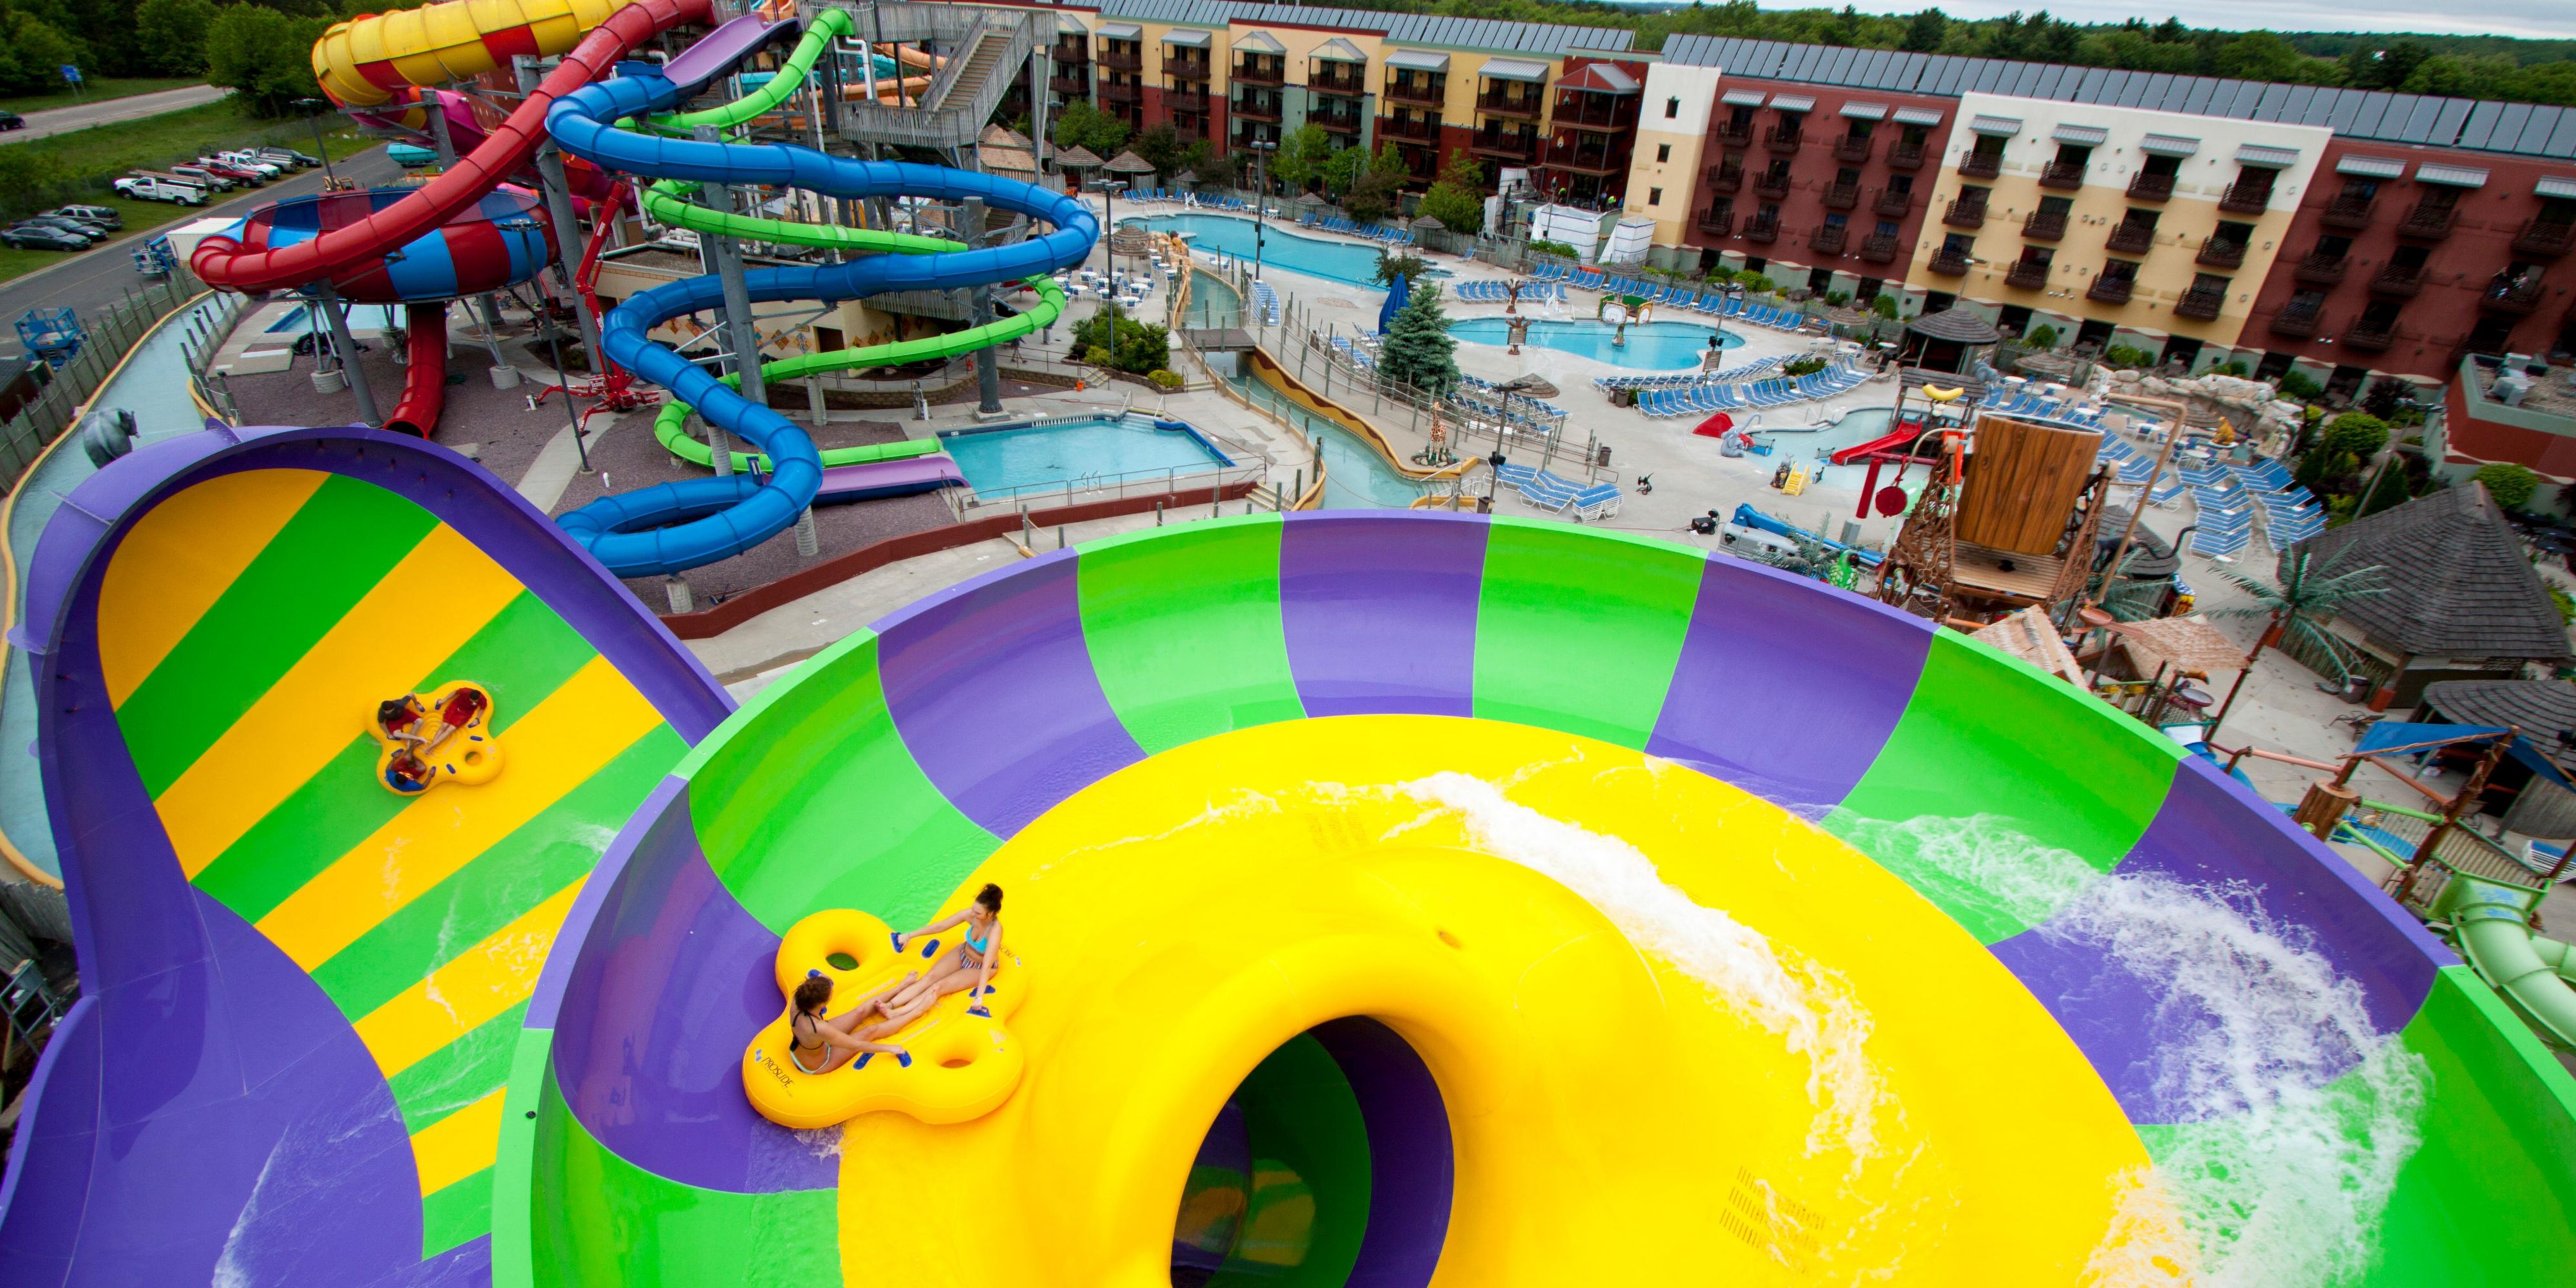 Are you planning a fun waterpark day? Stop by at the Front Desk for details on our discounted Kalahari Waterpark Passes available for our guests only. 